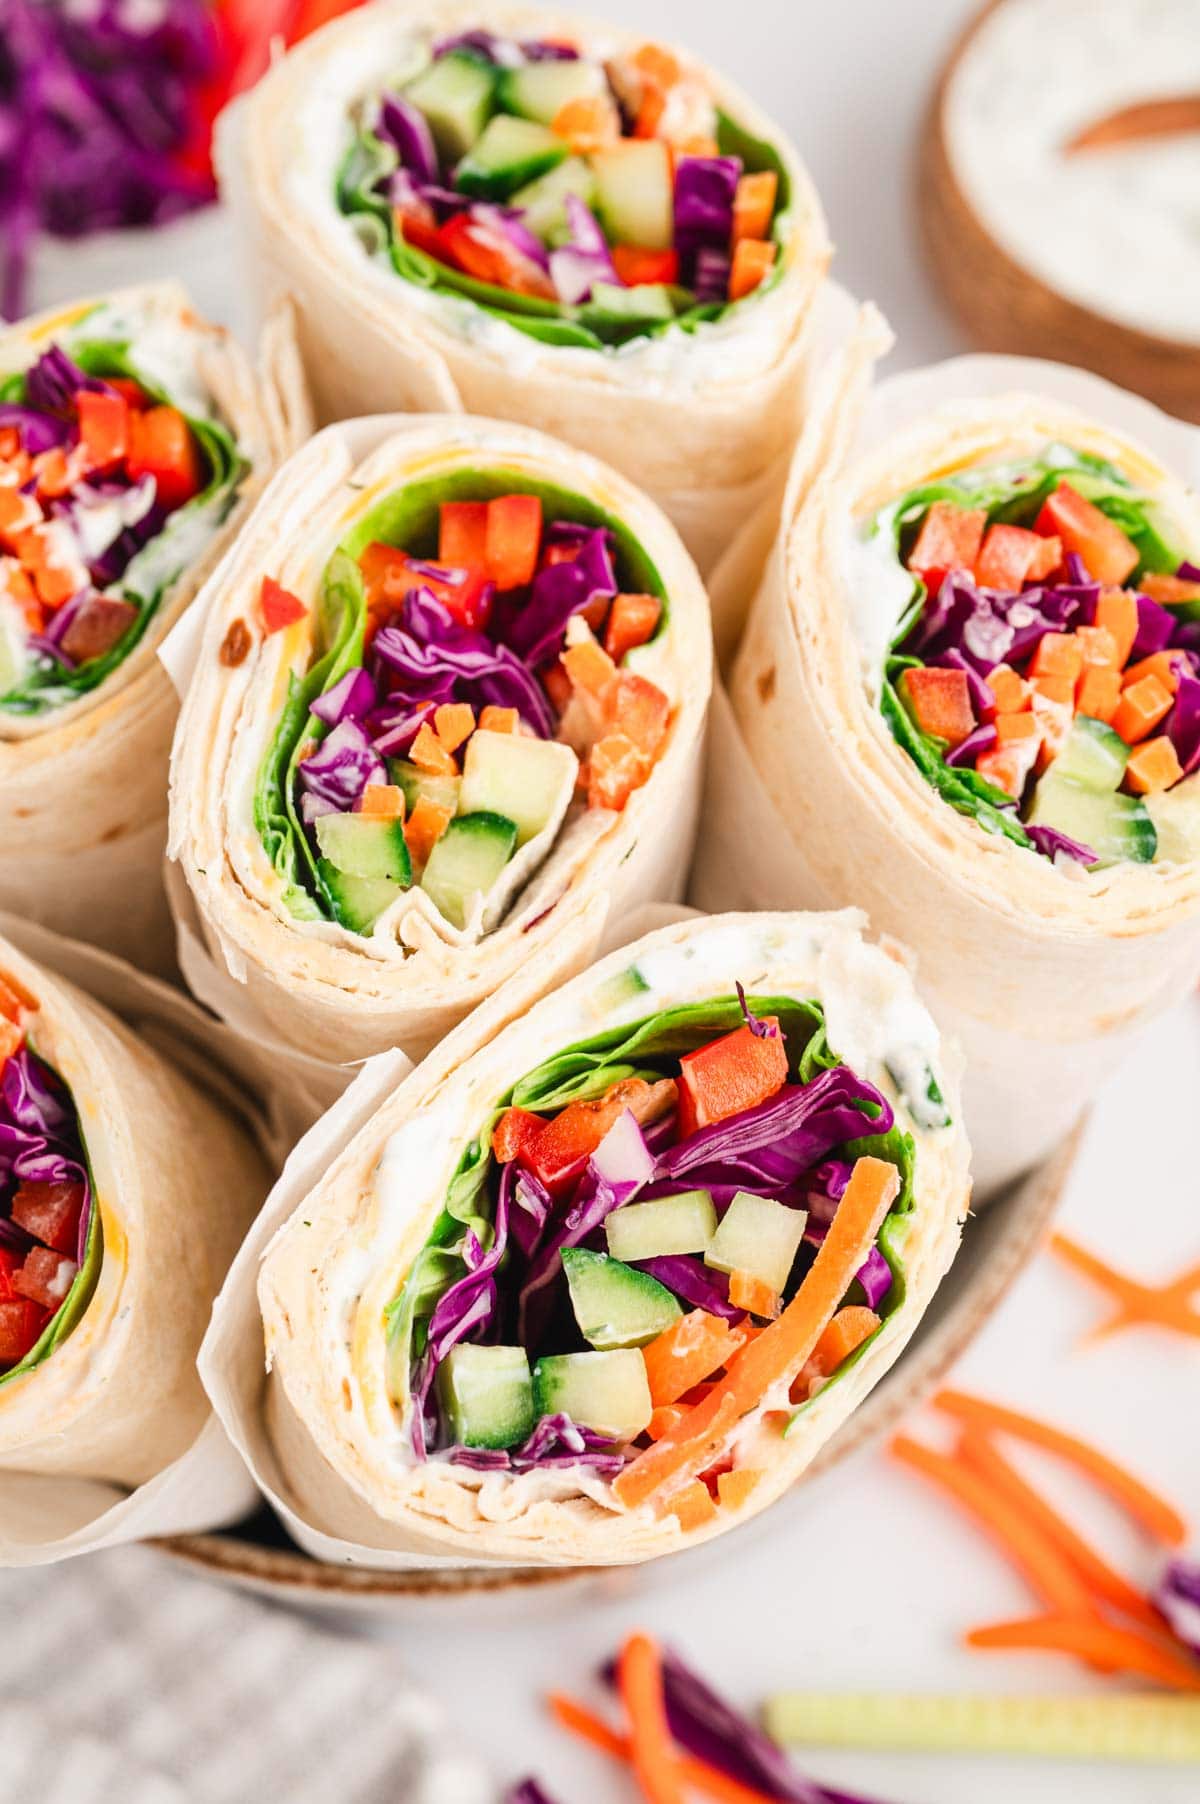 Rolled up veggie wraps.